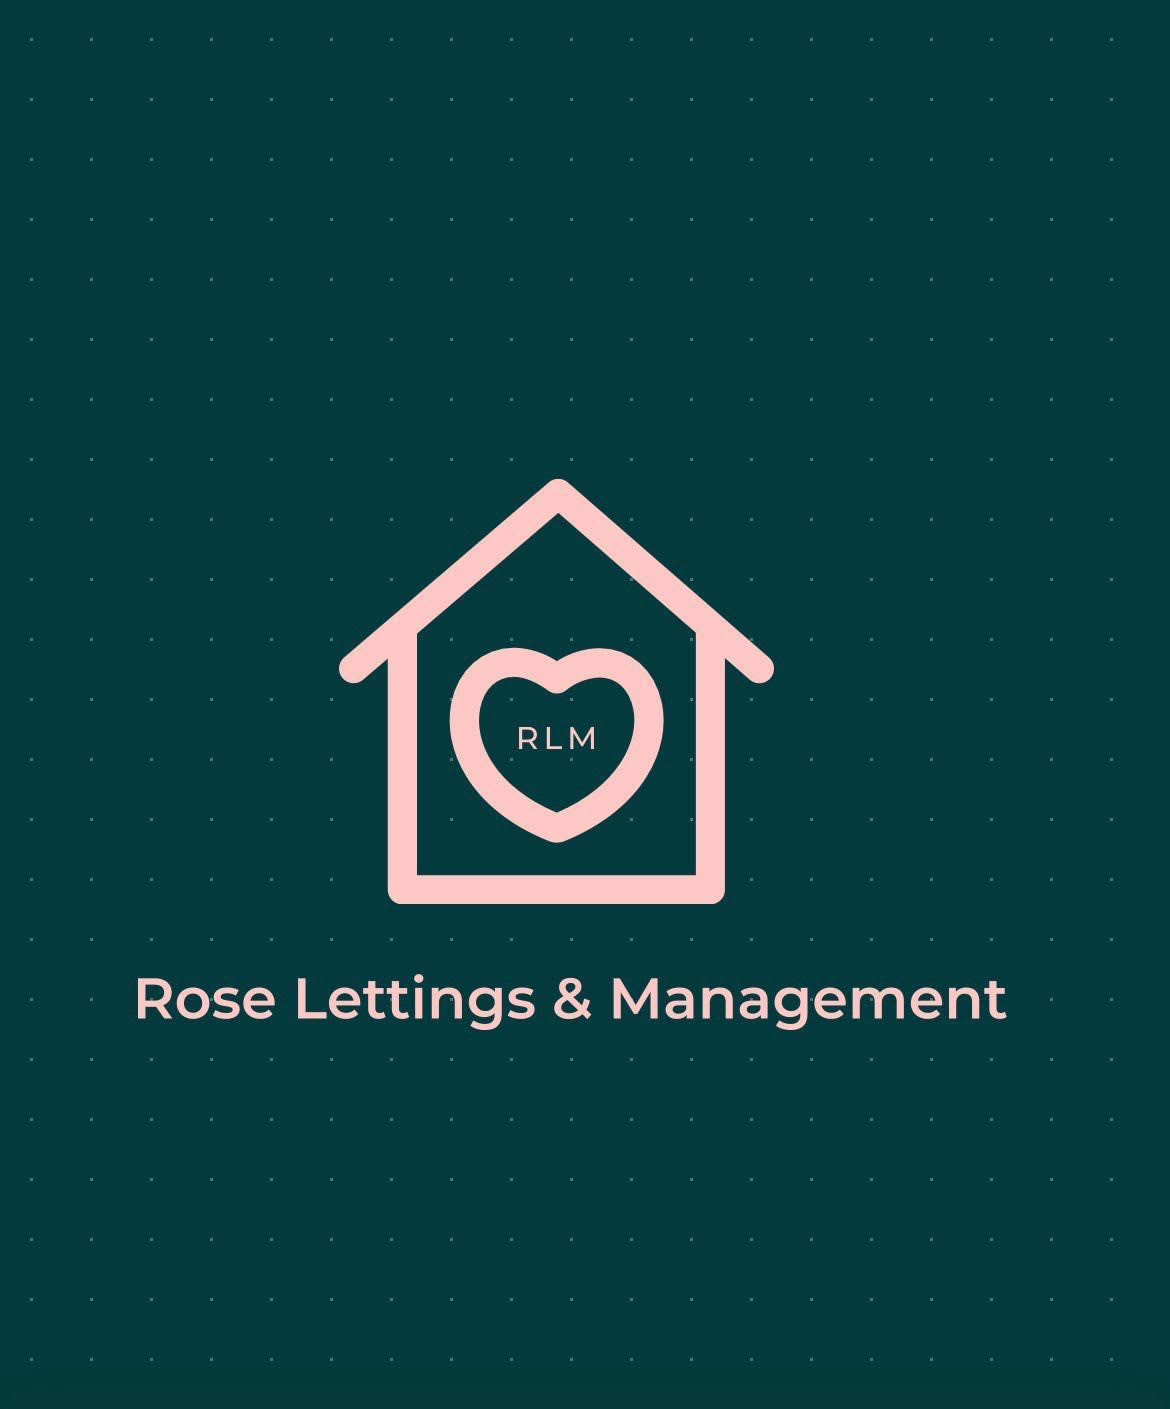 Rose lettings and management